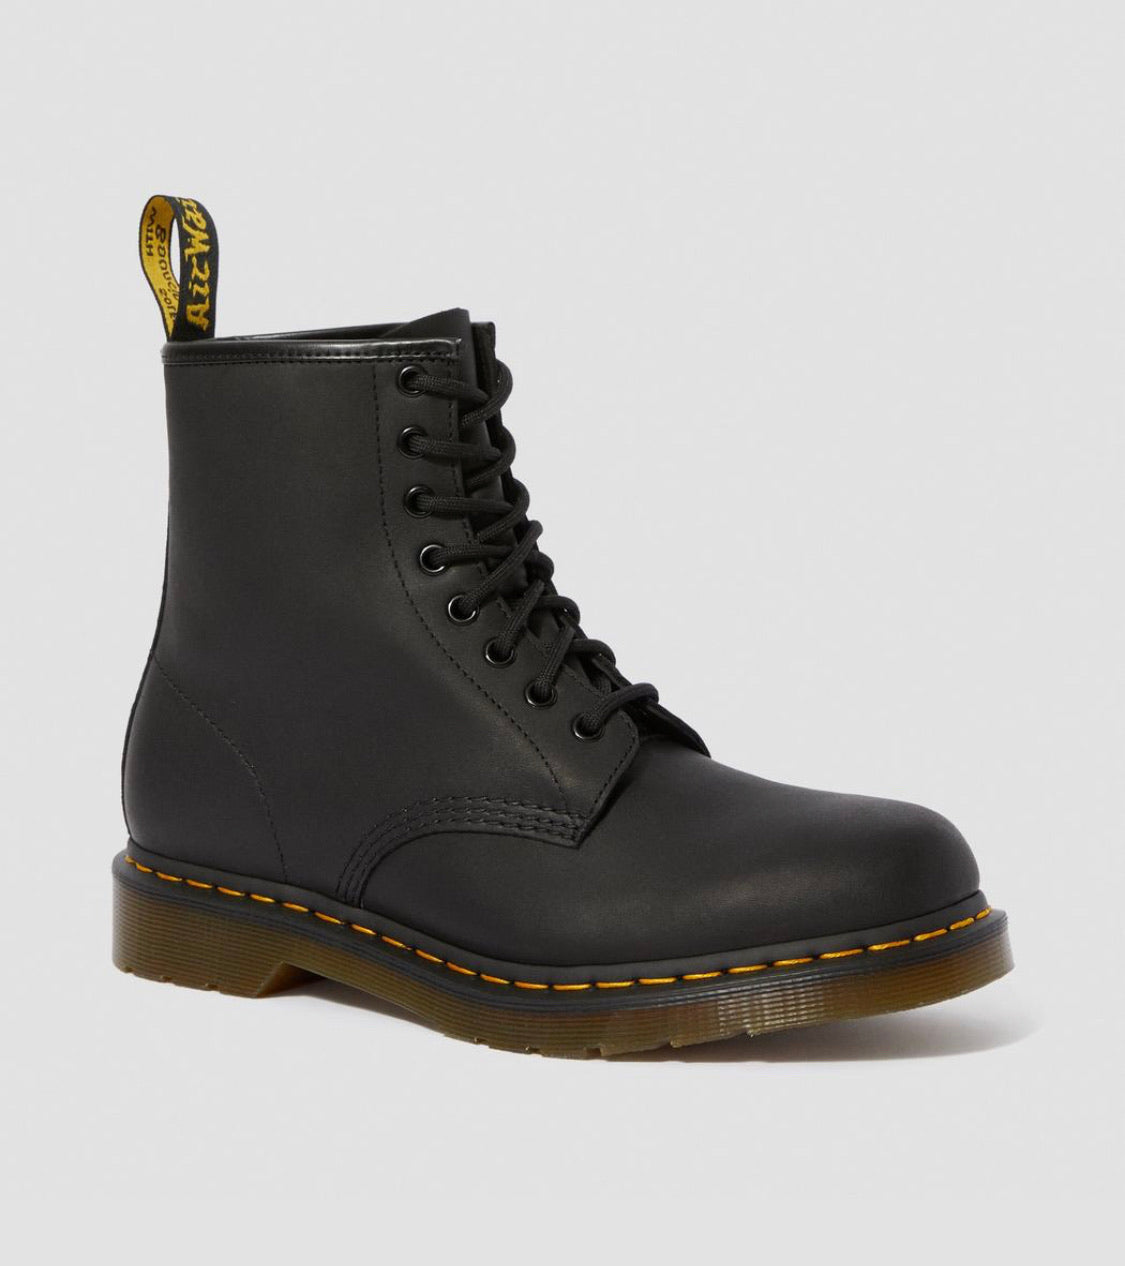 DR Martens Black 1460 Boot “Greasy“ | All Mixed Up